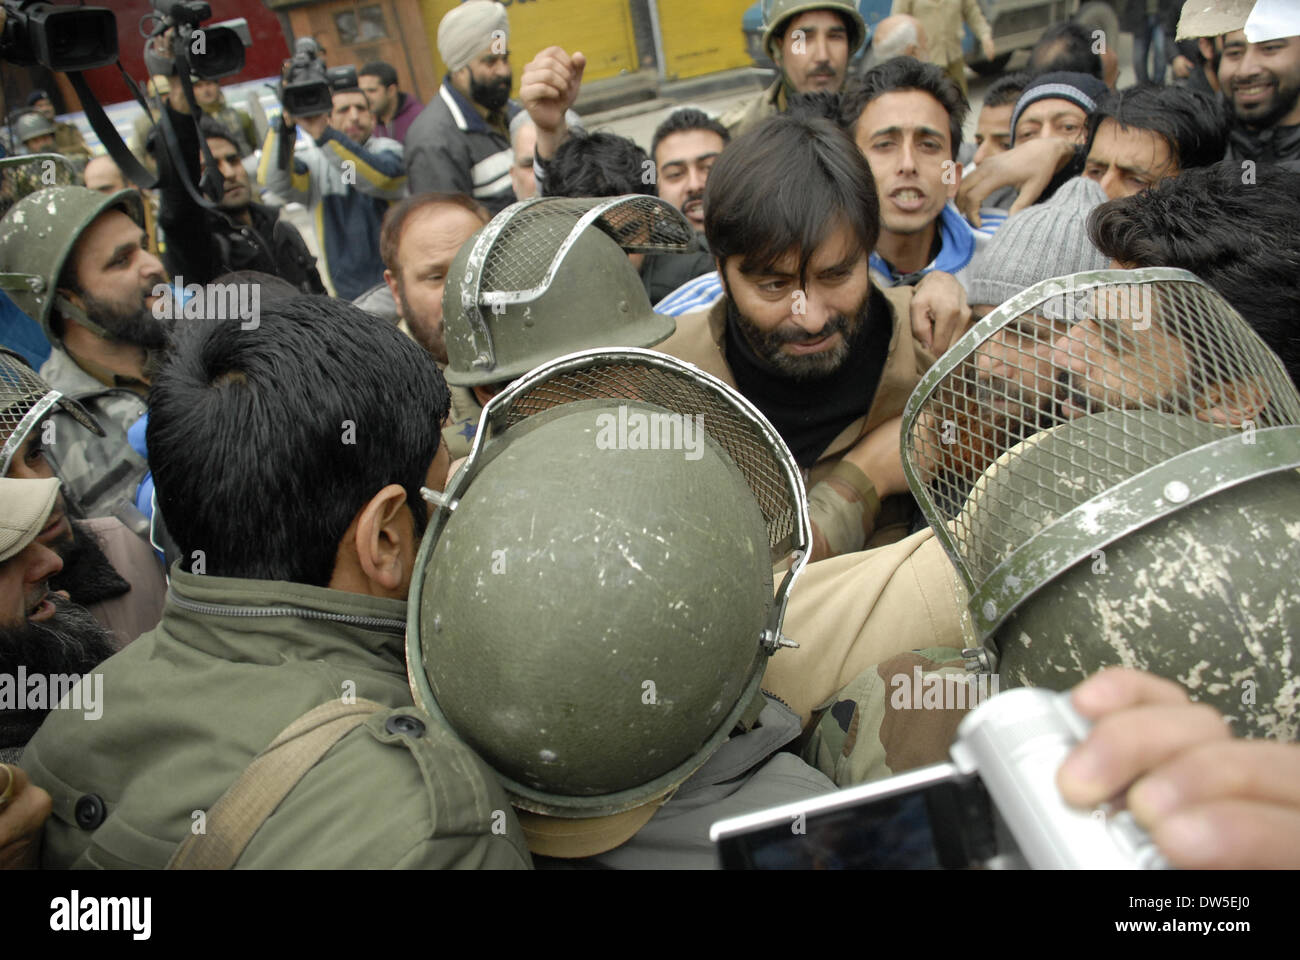 Srinagar, Indian Administered Kashmir. 28th Feb, 2014 supporters of pro-independence Jammu and Kashmir Libration Front (JKLF) scuffle with police during a protest in Srinagar against a military court verdict that exonerated five Indian army officers involved in the killing of five civilians 14 years ago. The incident occured in Pathribal village days after the killing of 35 Sikhs in the remote village of Chattisinghpora in 2000(Sofi Suhail/ Alamy Live News) Stock Photo